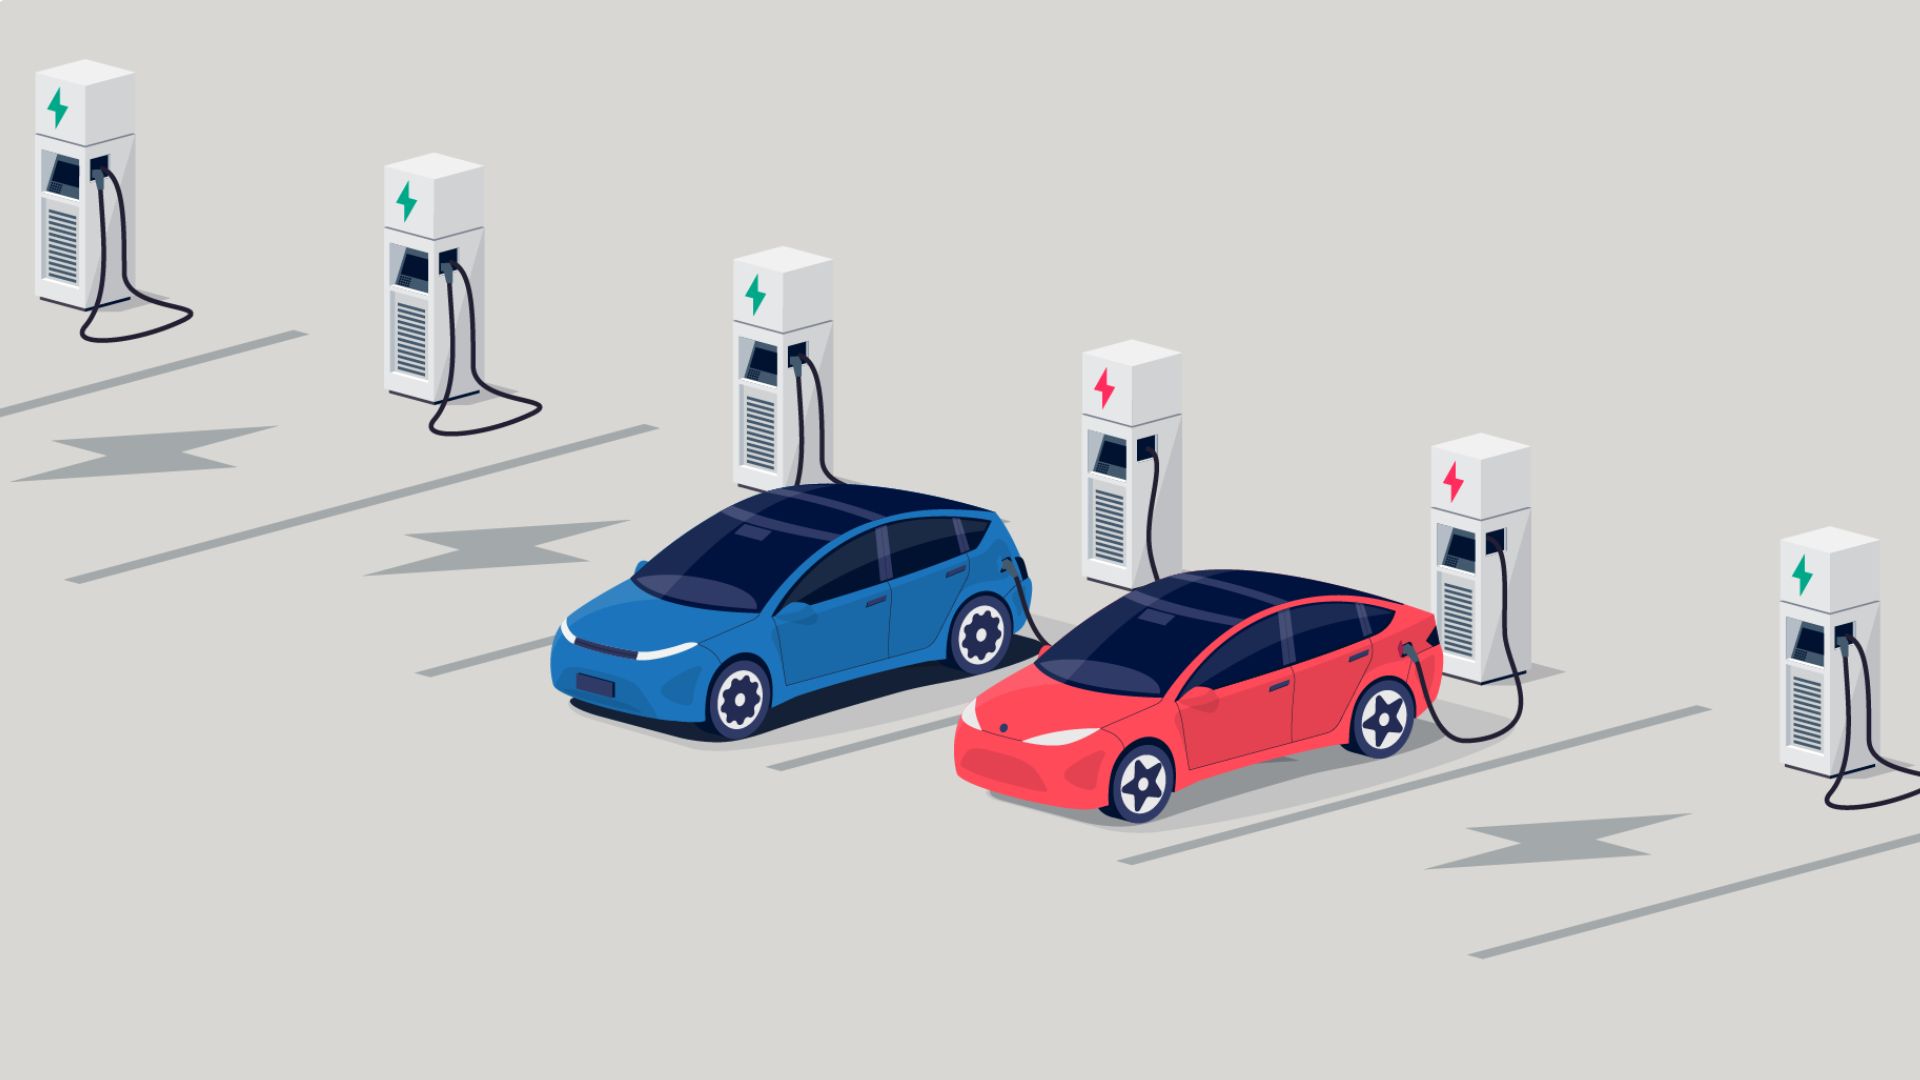 https://e-vehicleinfo.com/india-gearing-up-to-build-robust-ev-charging-infrastructure/